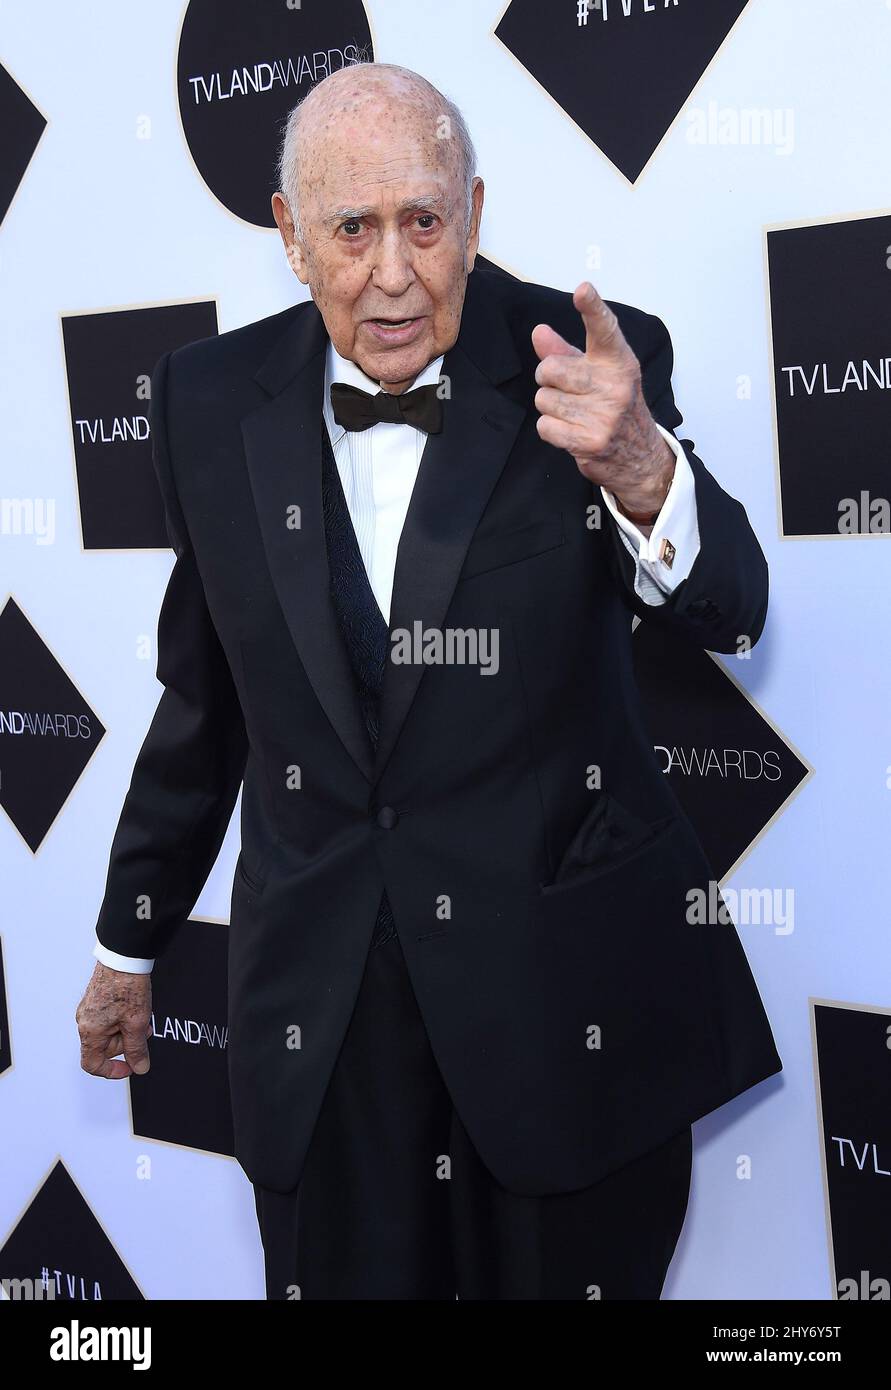 Carl Reiner attending the 2015 TV LAND Awards held at Saban Theatre in Los Angeles, USA. Stock Photo